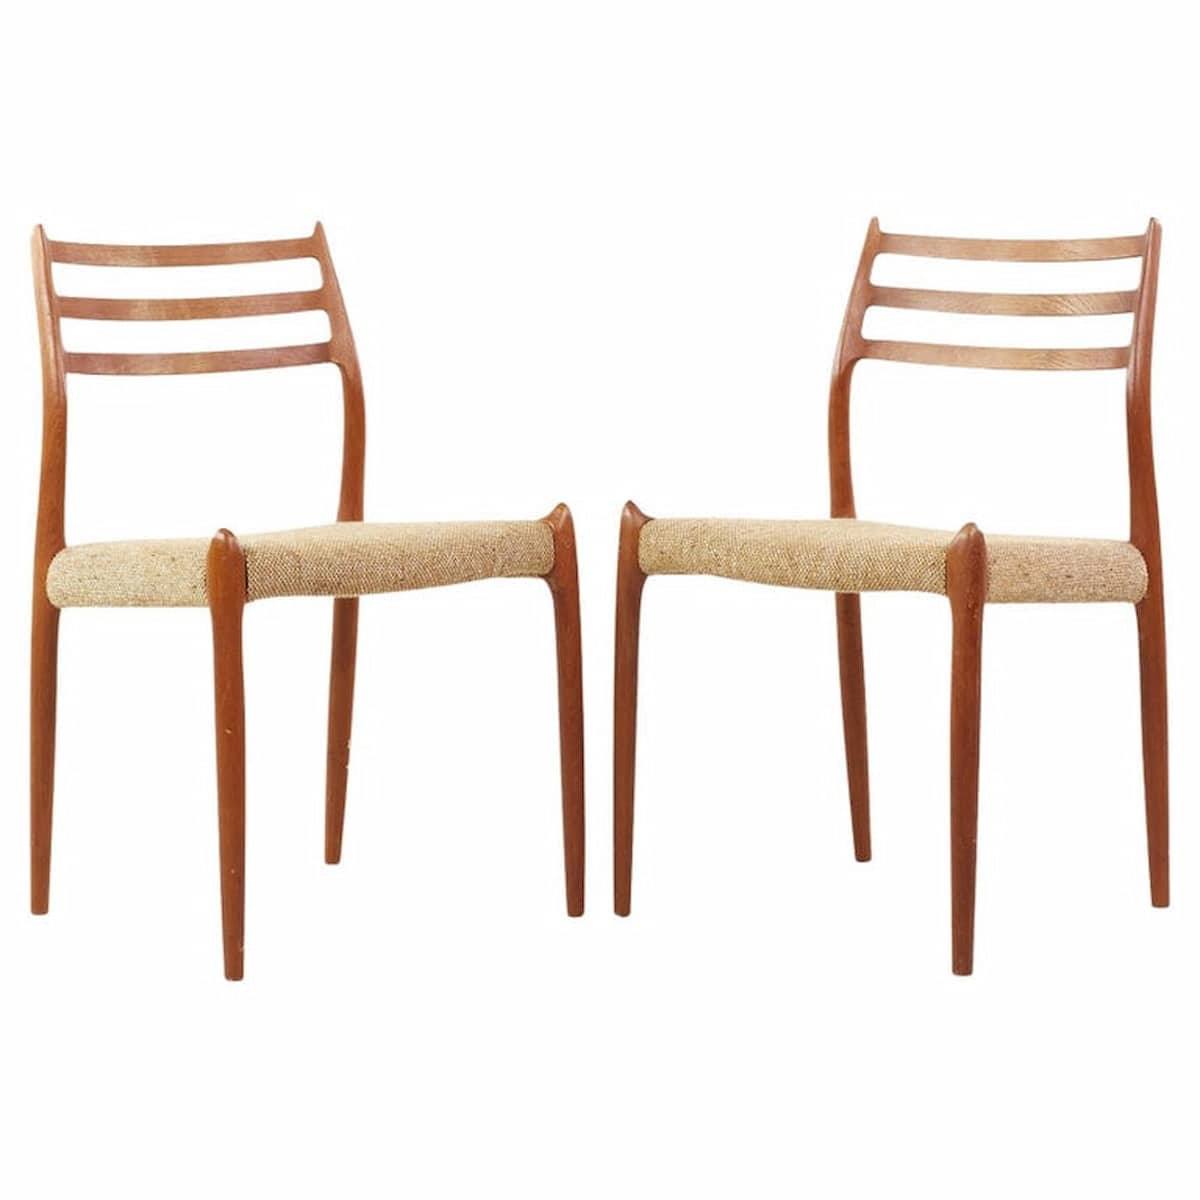 Niels Moller 62 Mid Century Teak Dining Chairs - Set of 2